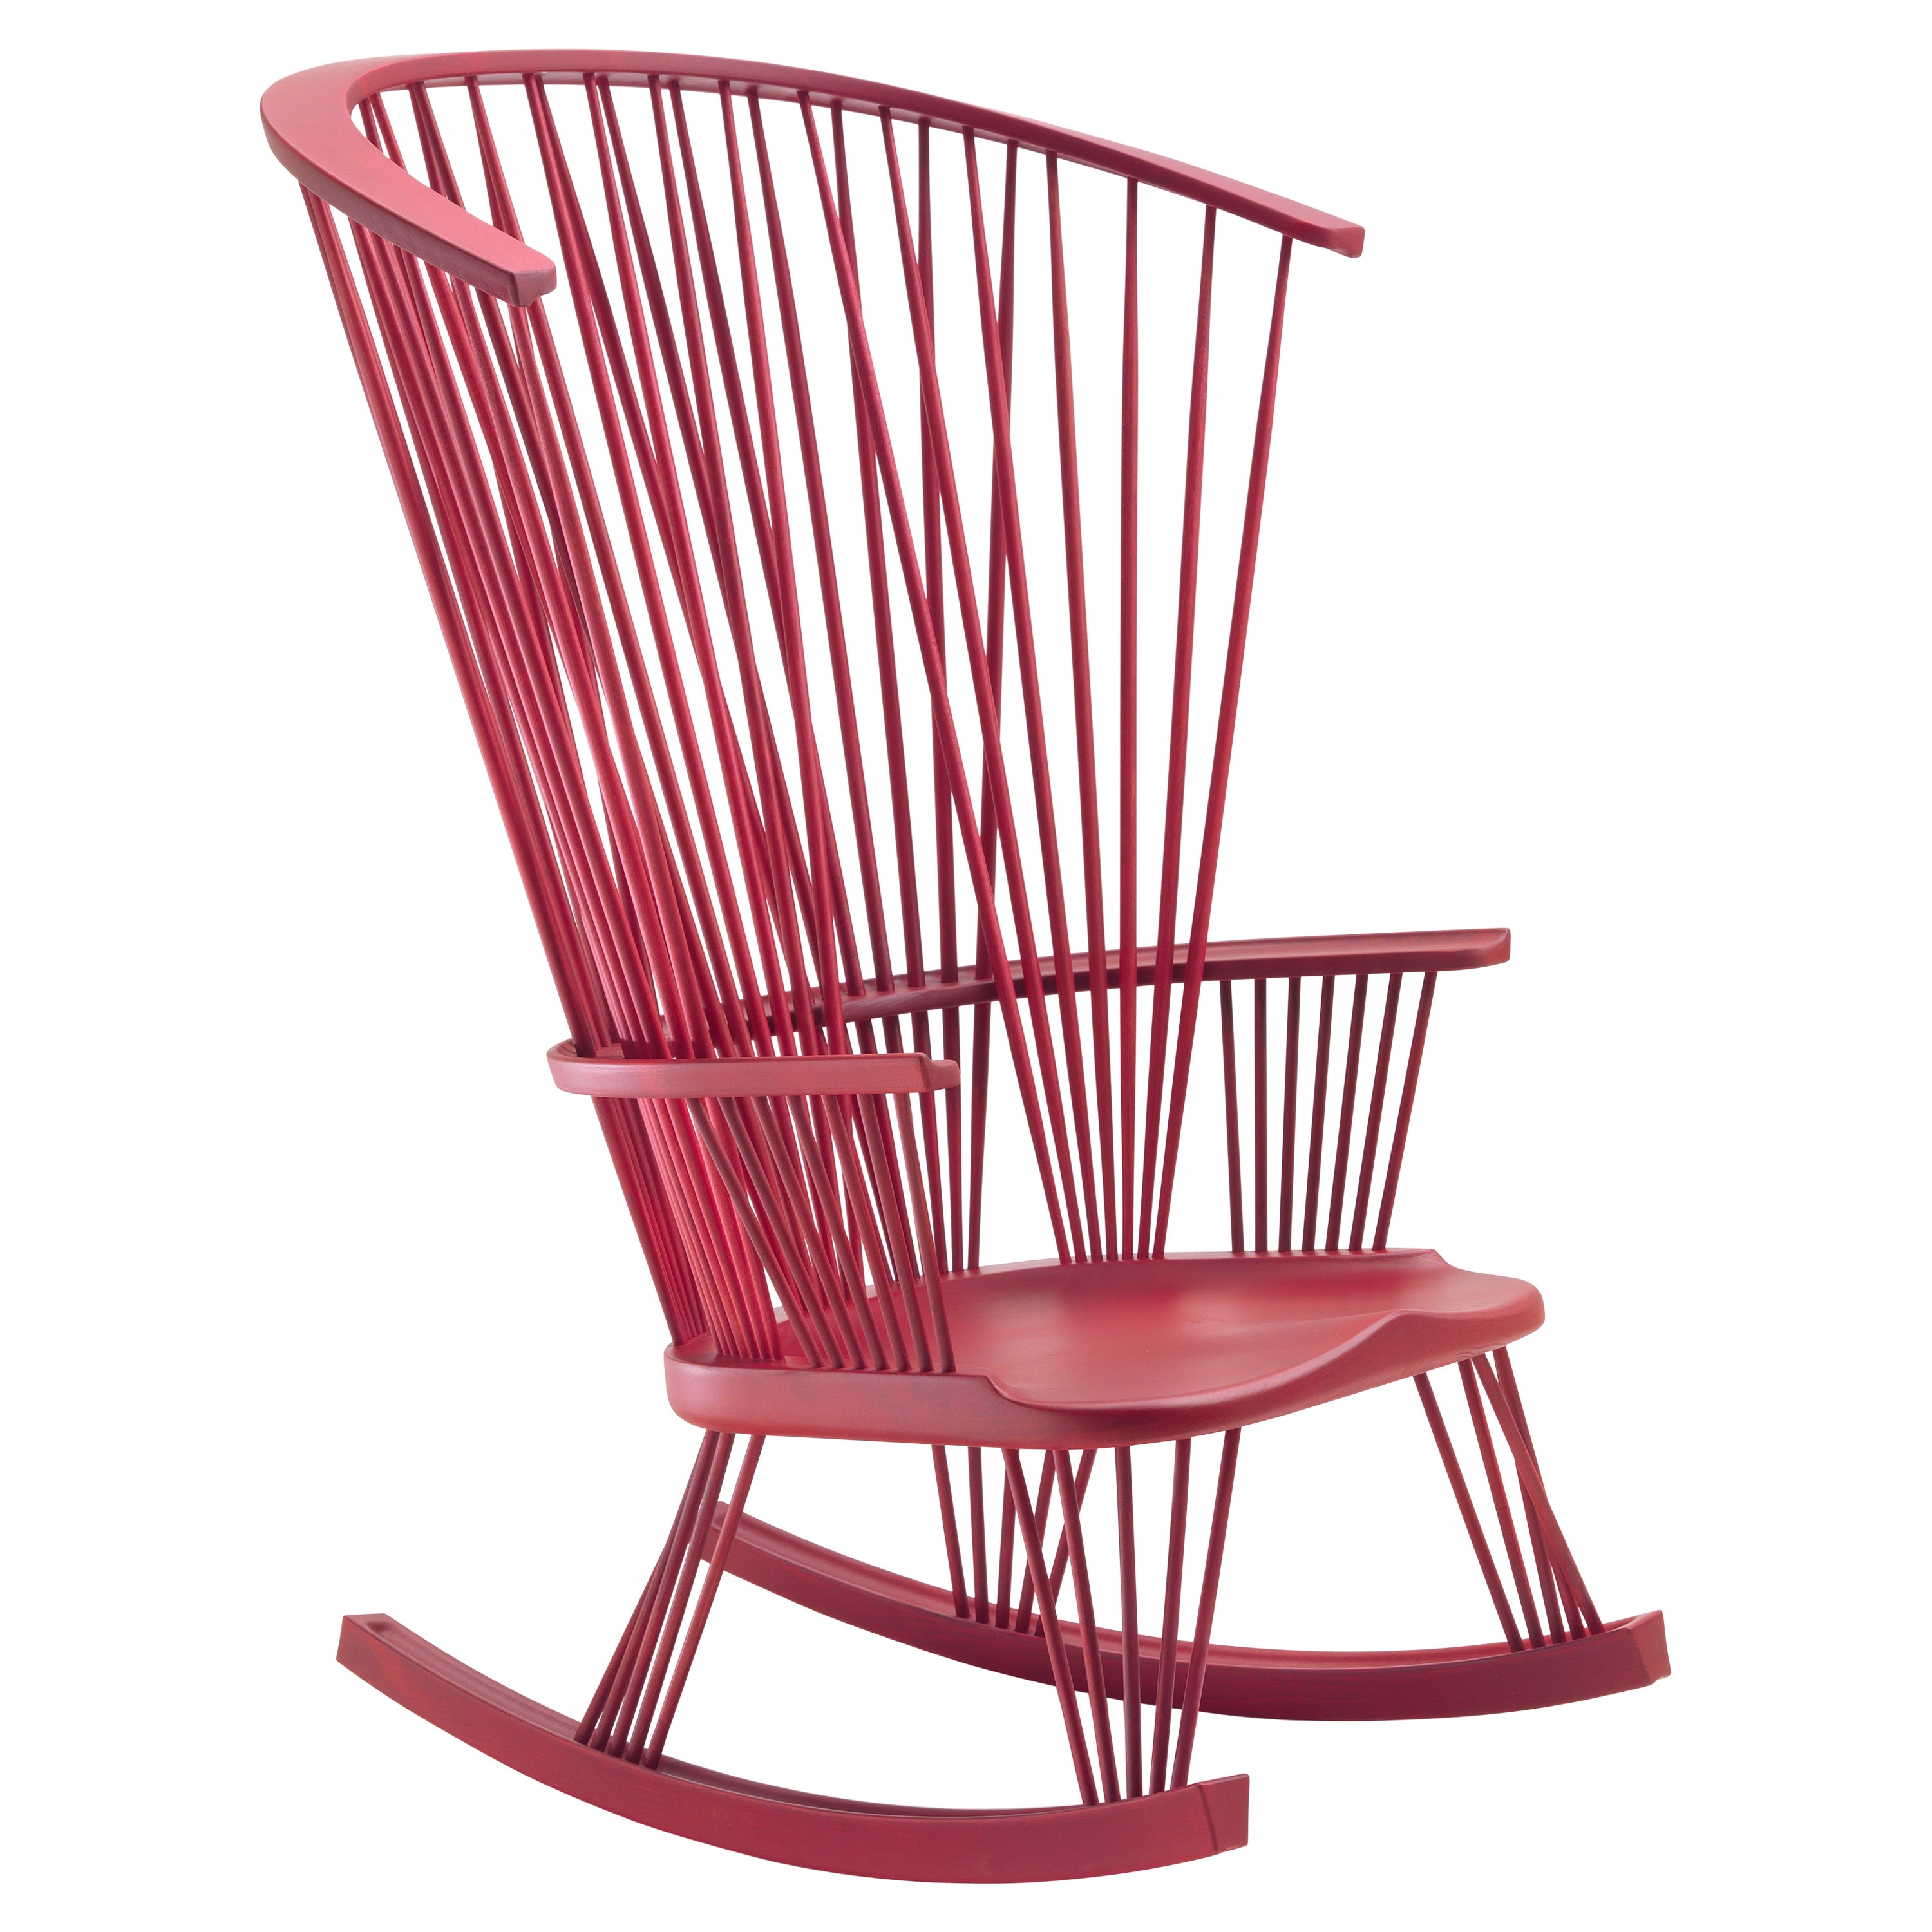 SITLALI Fuchsia Pink Rocking Armchair in Solid Wood with Rods and Lacquering